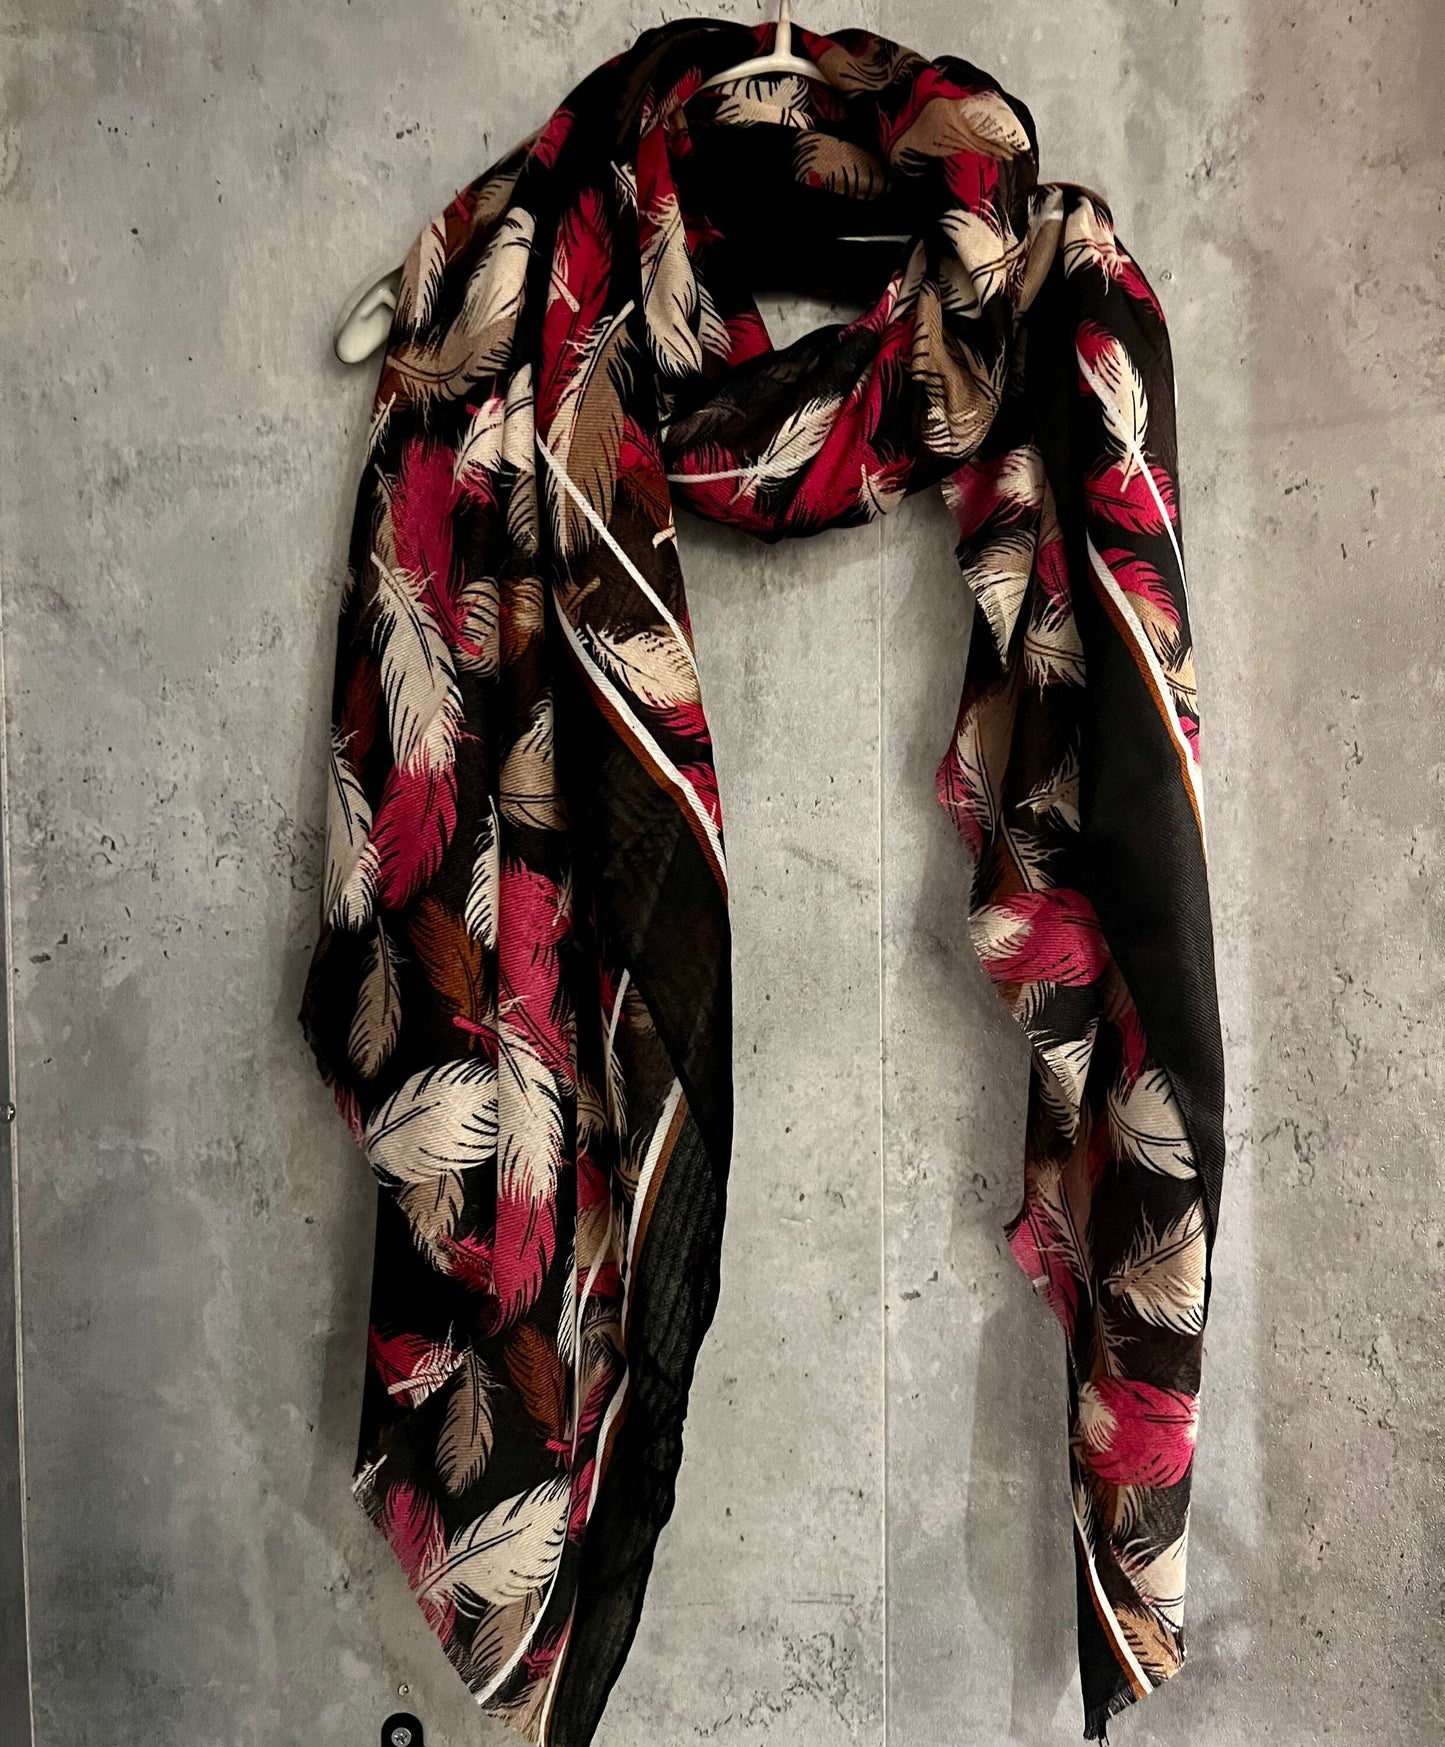 Black Cotton Scarf with Floating White Pink Feathers – A Stylish and Versatile Gift for Her